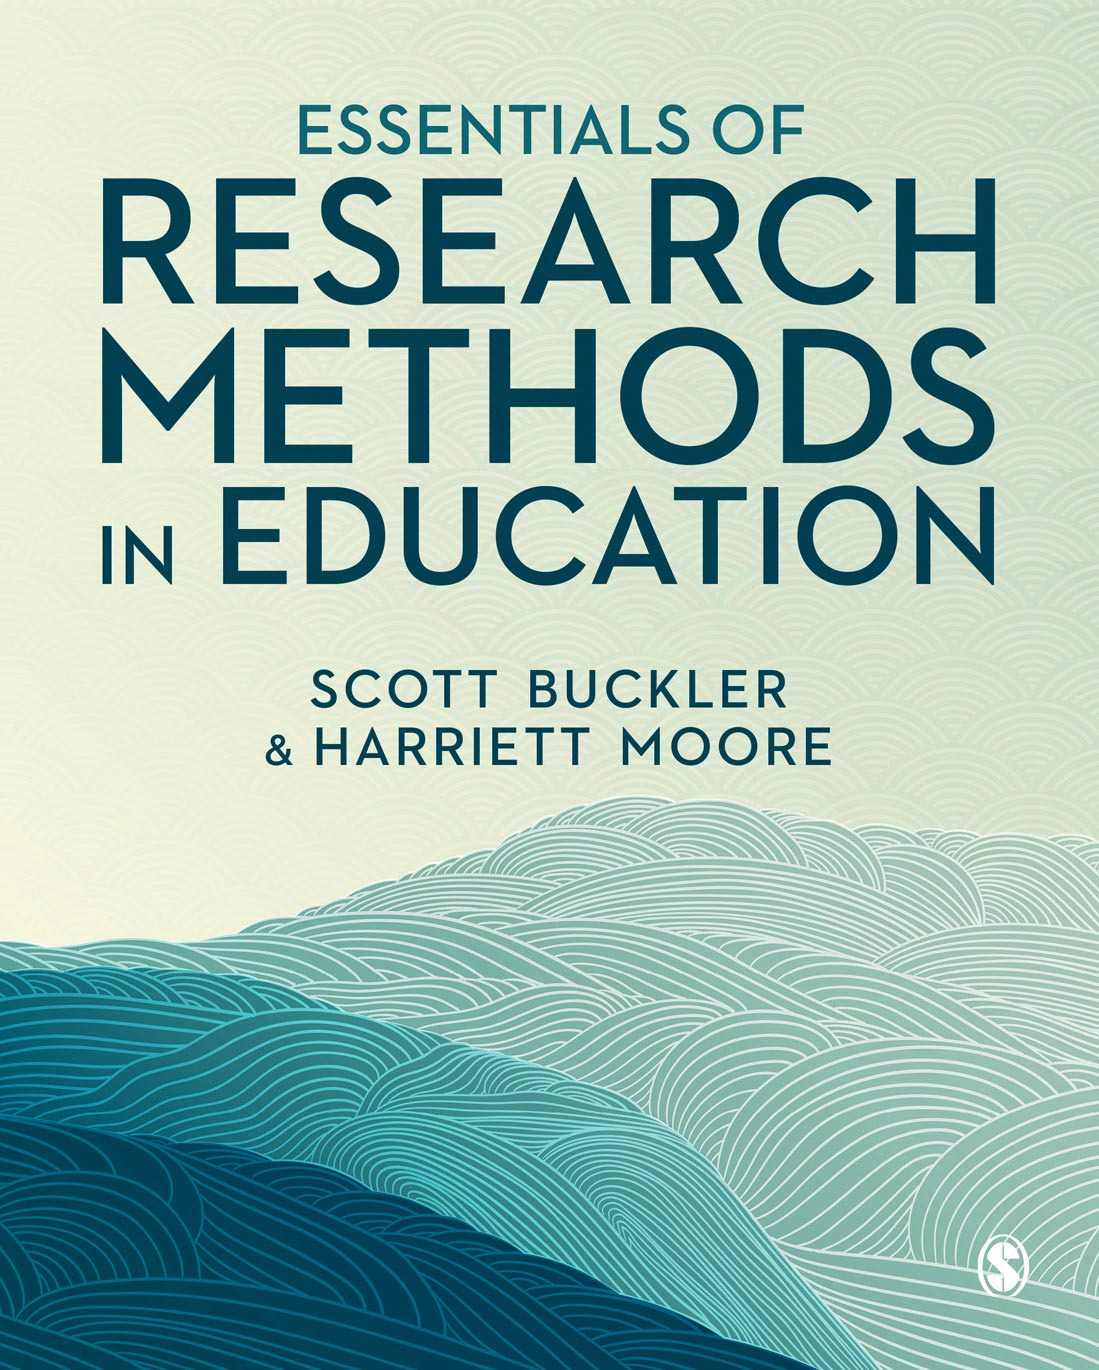 Essentials of Research Methods in Education book cover